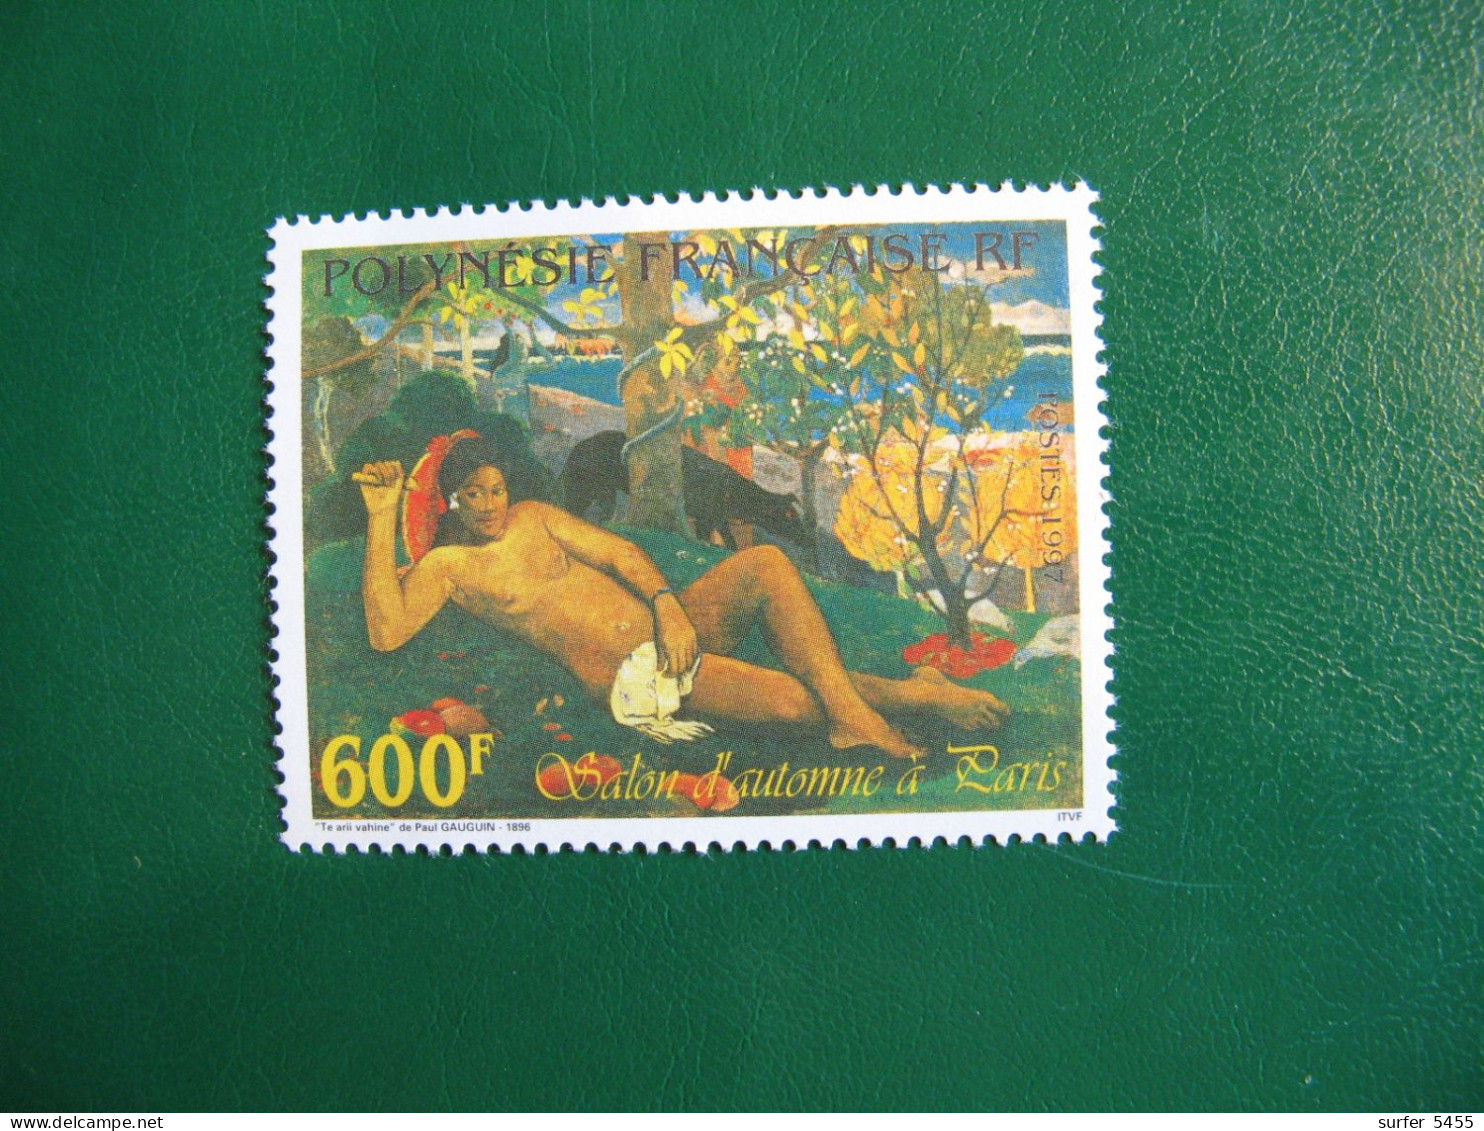 P0LYNESIE PO ORDINAIRE N° 553 TIMBRE NEUF ** LUXE - MNH - SERIE COMPLETE - COTE 18,50 EUROS - Unused Stamps